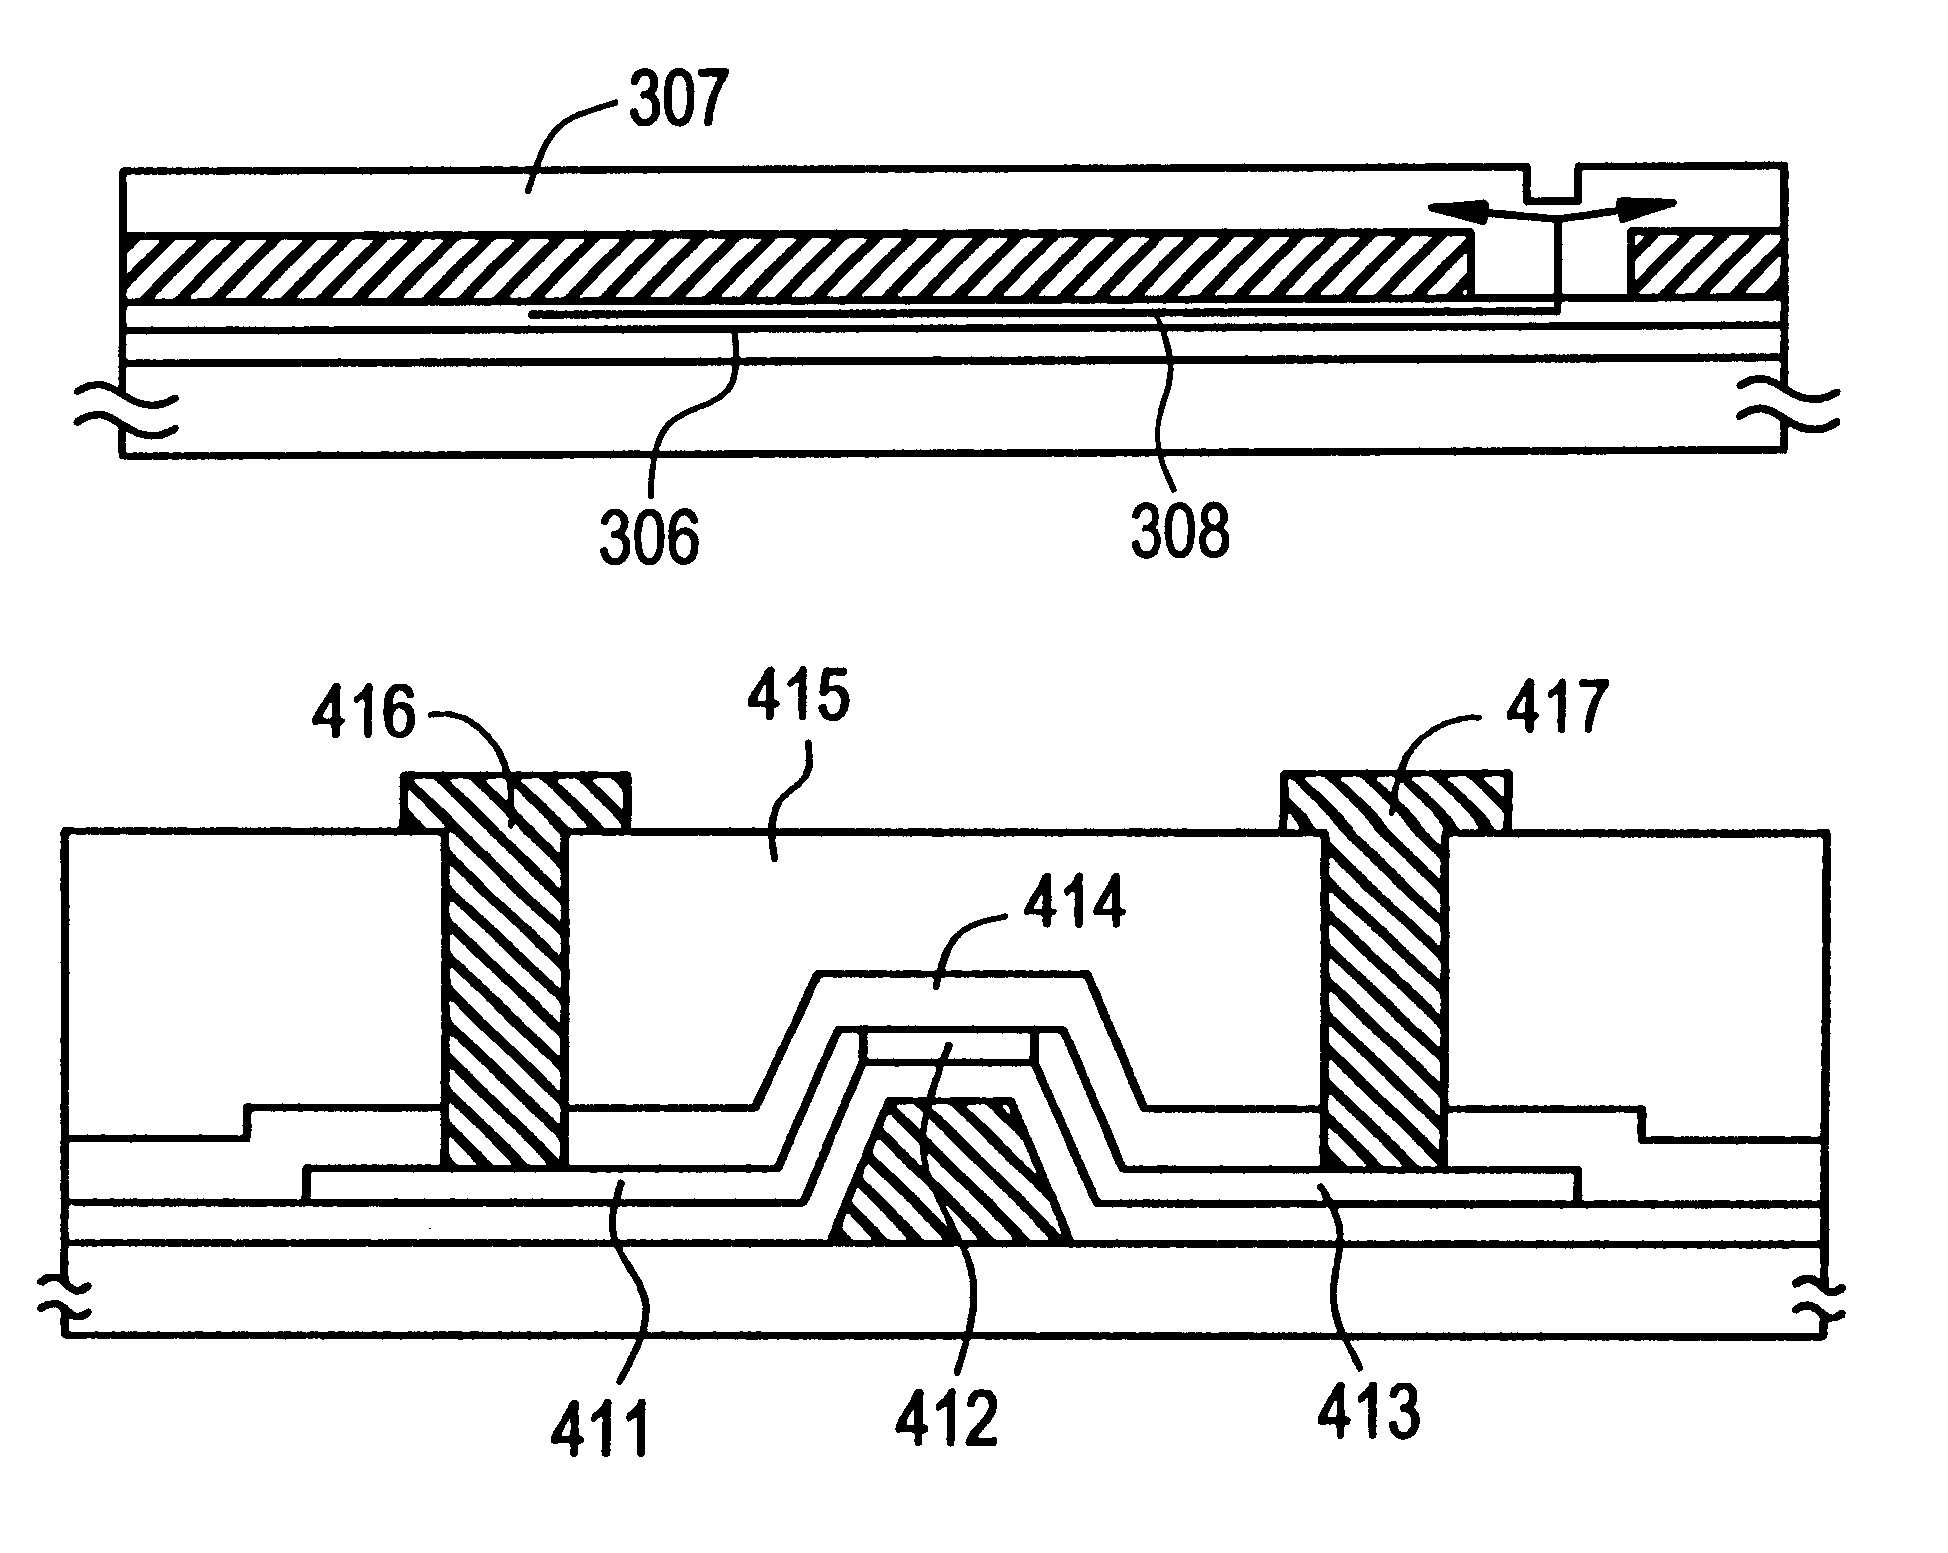 Method of forming a TFT by adding a metal to a silicon film promoting crystallization, forming a mask, forming another silicon layer with group XV elements, and gettering the metal through opening in the mask